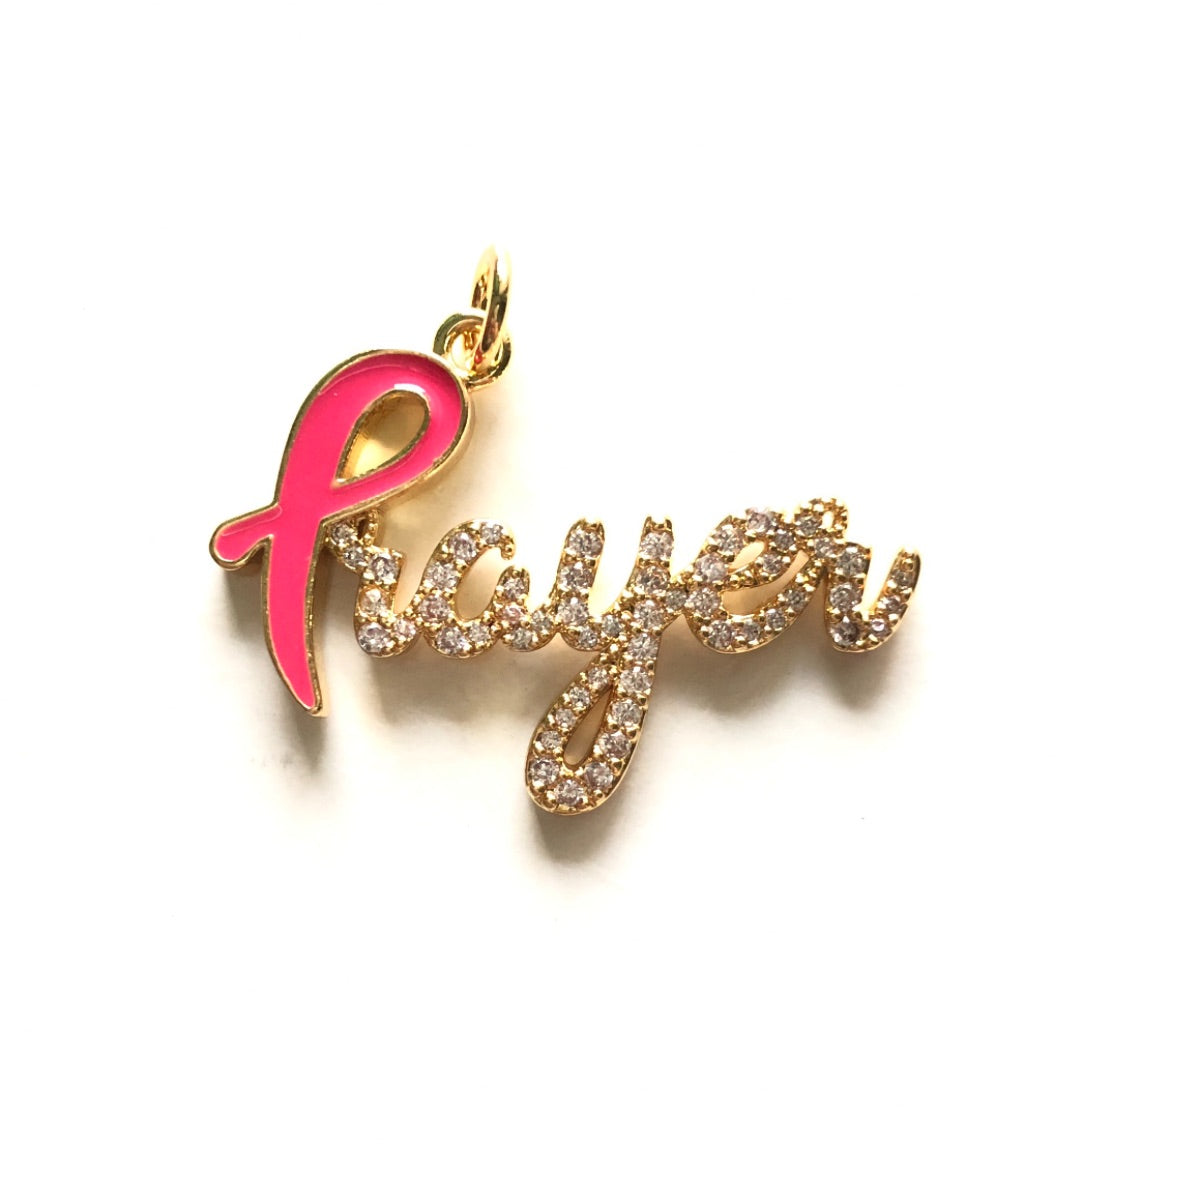 10pcs/lot CZ Paved Pink Ribbon Prayer Charms - Breast Cancer Awareness Gold CZ Paved Charms Breast Cancer Awareness Charms Beads Beyond